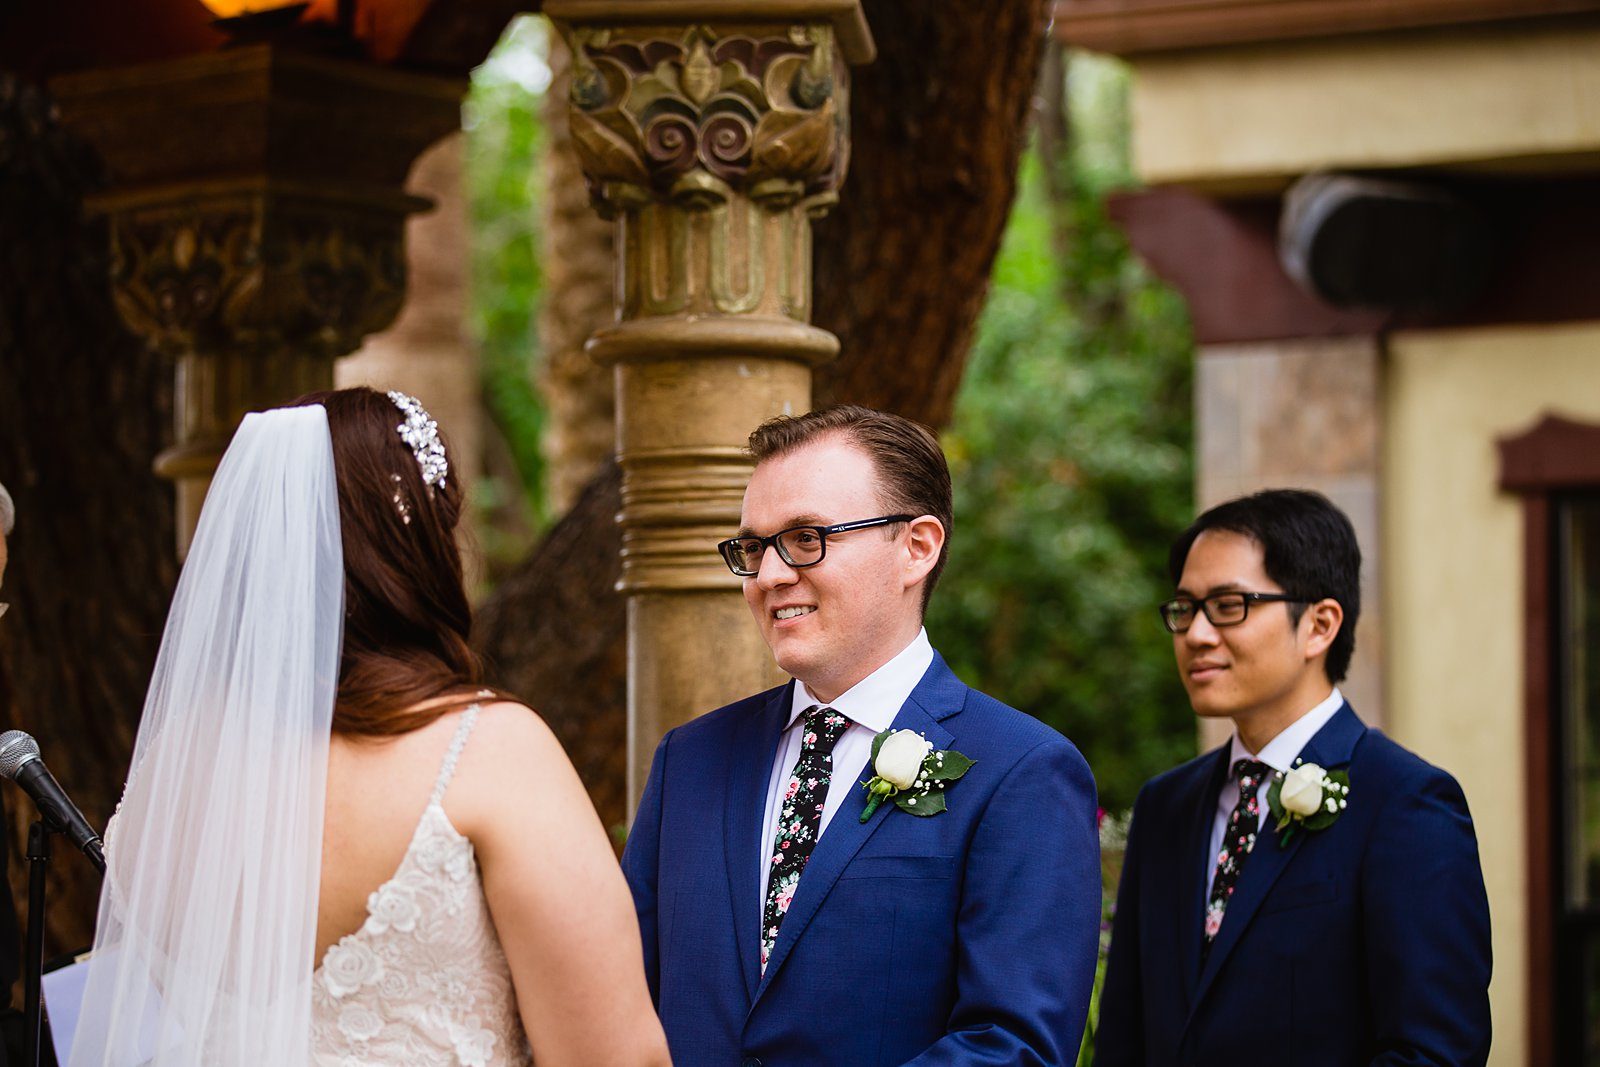 Groom looking at his bride during their wedding ceremony at The Wright House Provencal by Mesa wedding photographer PMA Photography.